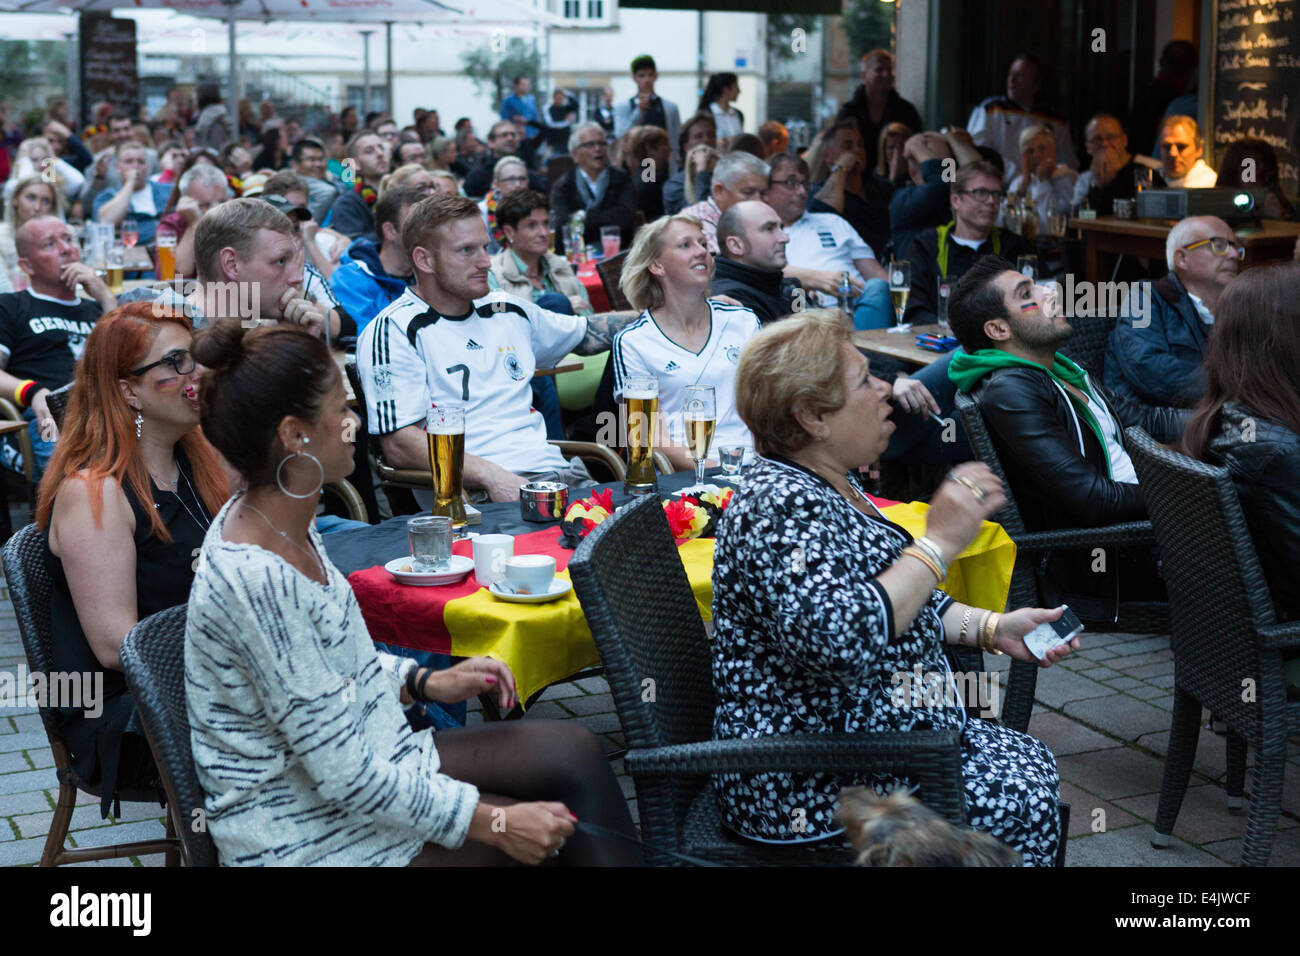 German football fans watch their team play Argentina in the World Cup final